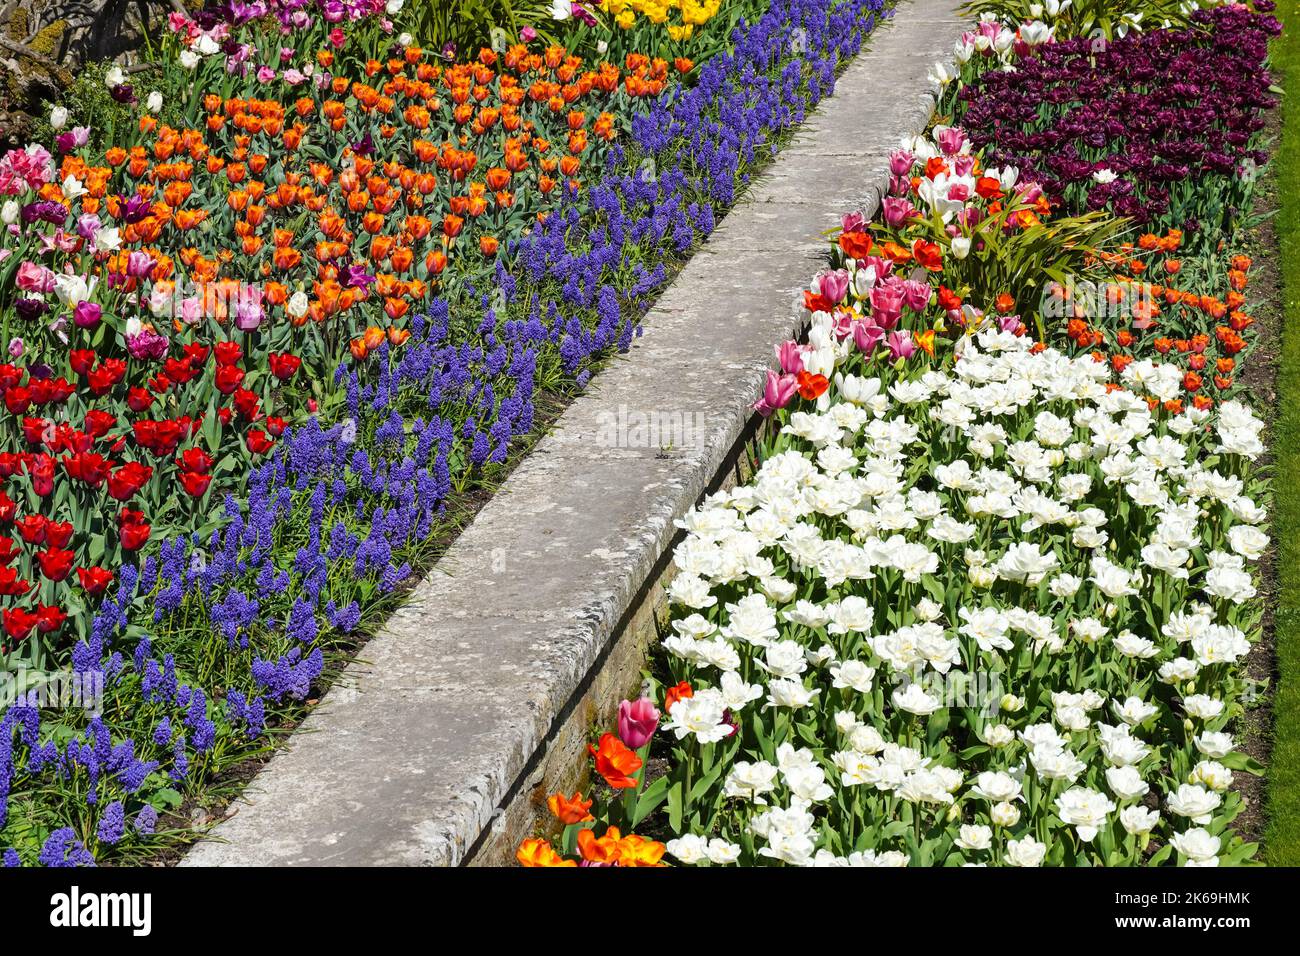 Spring flowers blooming in a garden flowerbeds Stock Photo